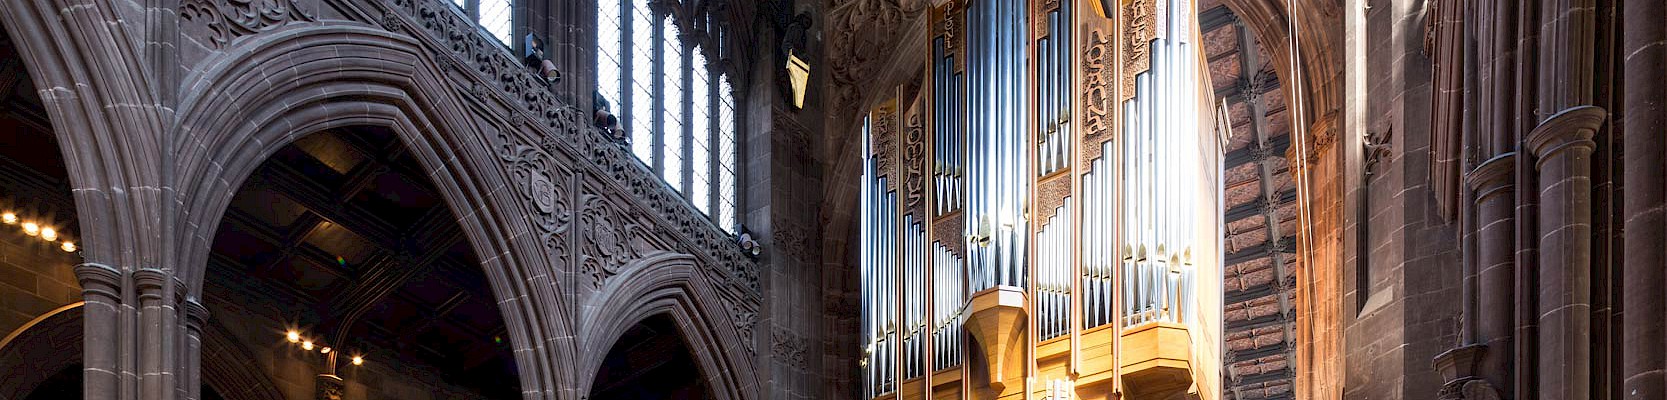 Panoramic view of the Manchester Cathedral Organ